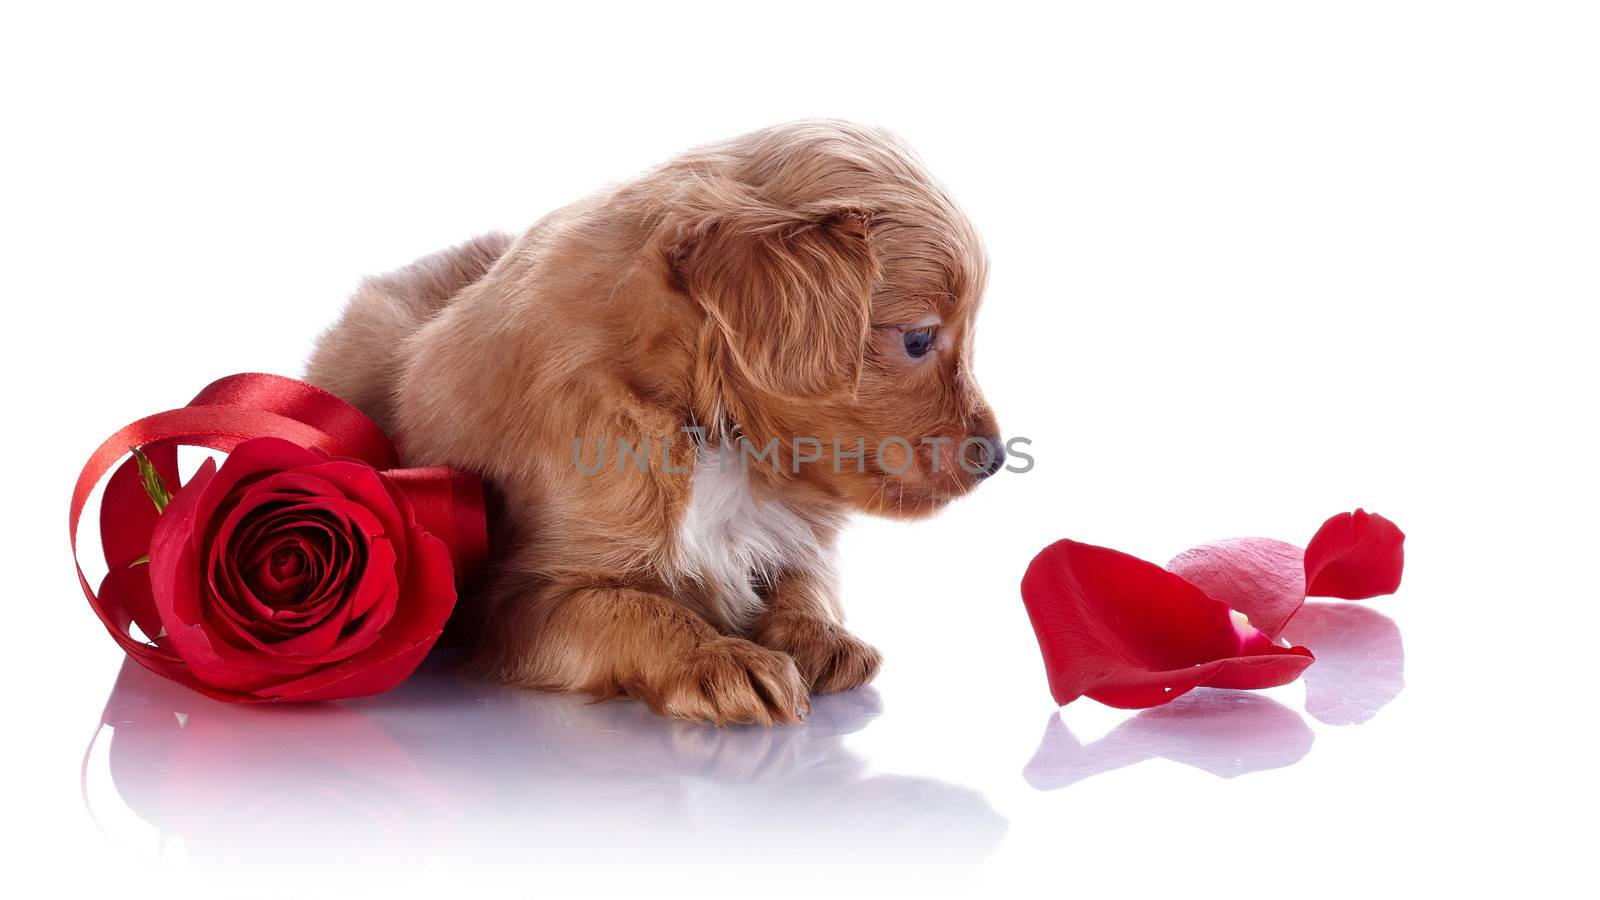 Puppy with a red rose and petals. Puppy of a decorative doggie. Decorative dog. Puppy of the Petersburg orchid on a white background